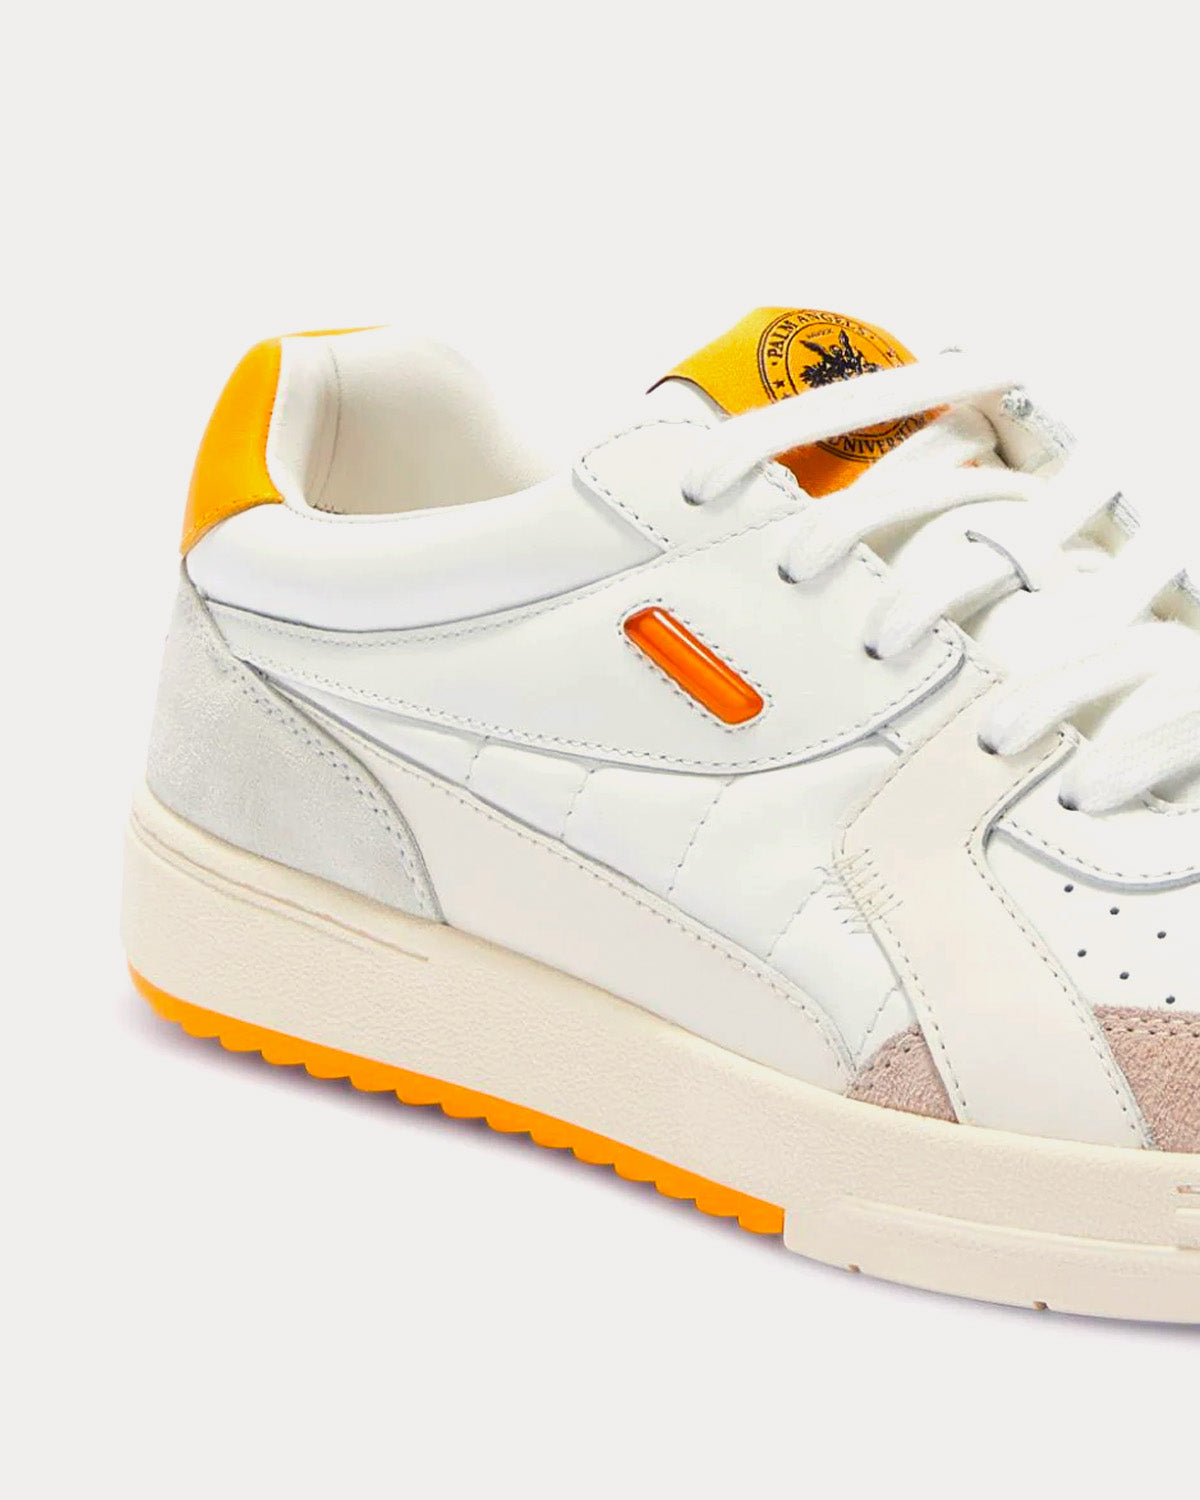 Palm Angels - University White / Yellow Low Top Sneakers